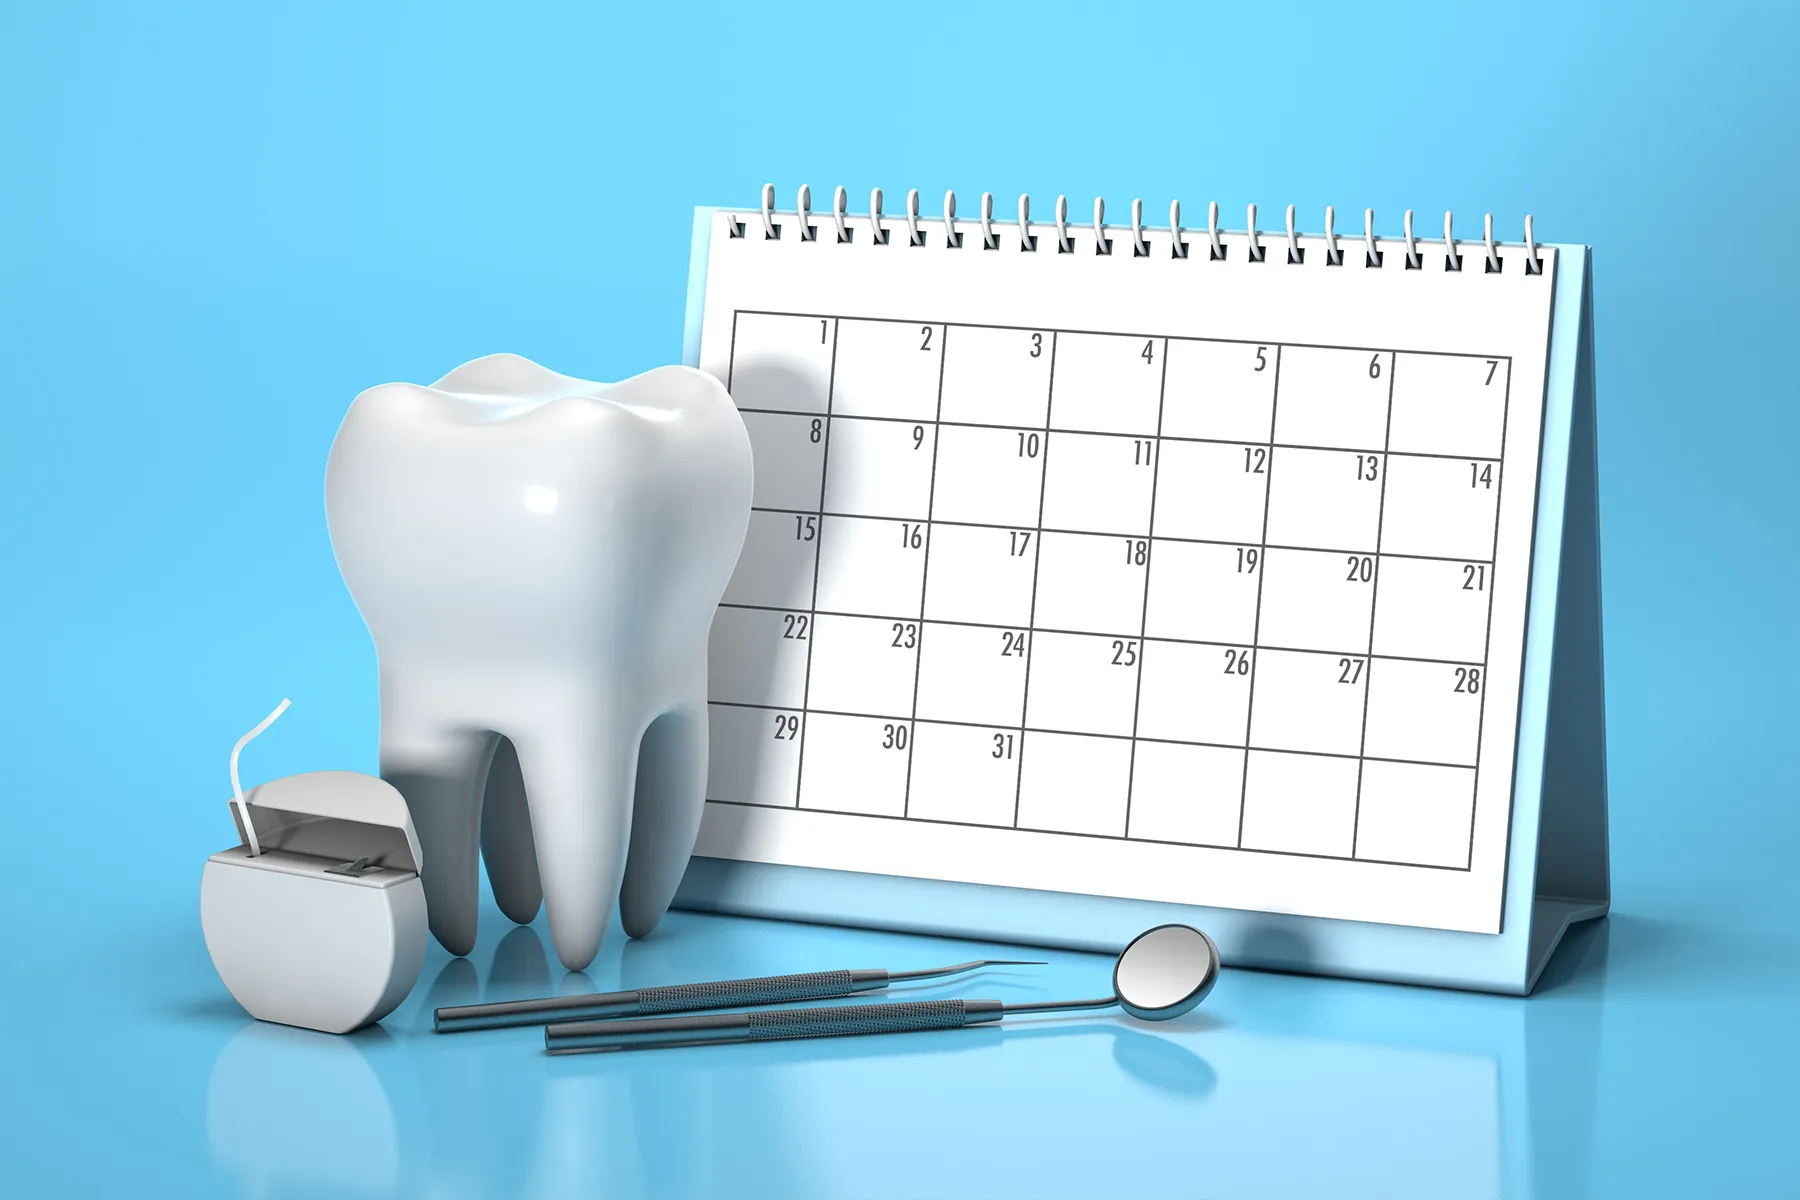 Why is sorting a dental emergency quickly so important?